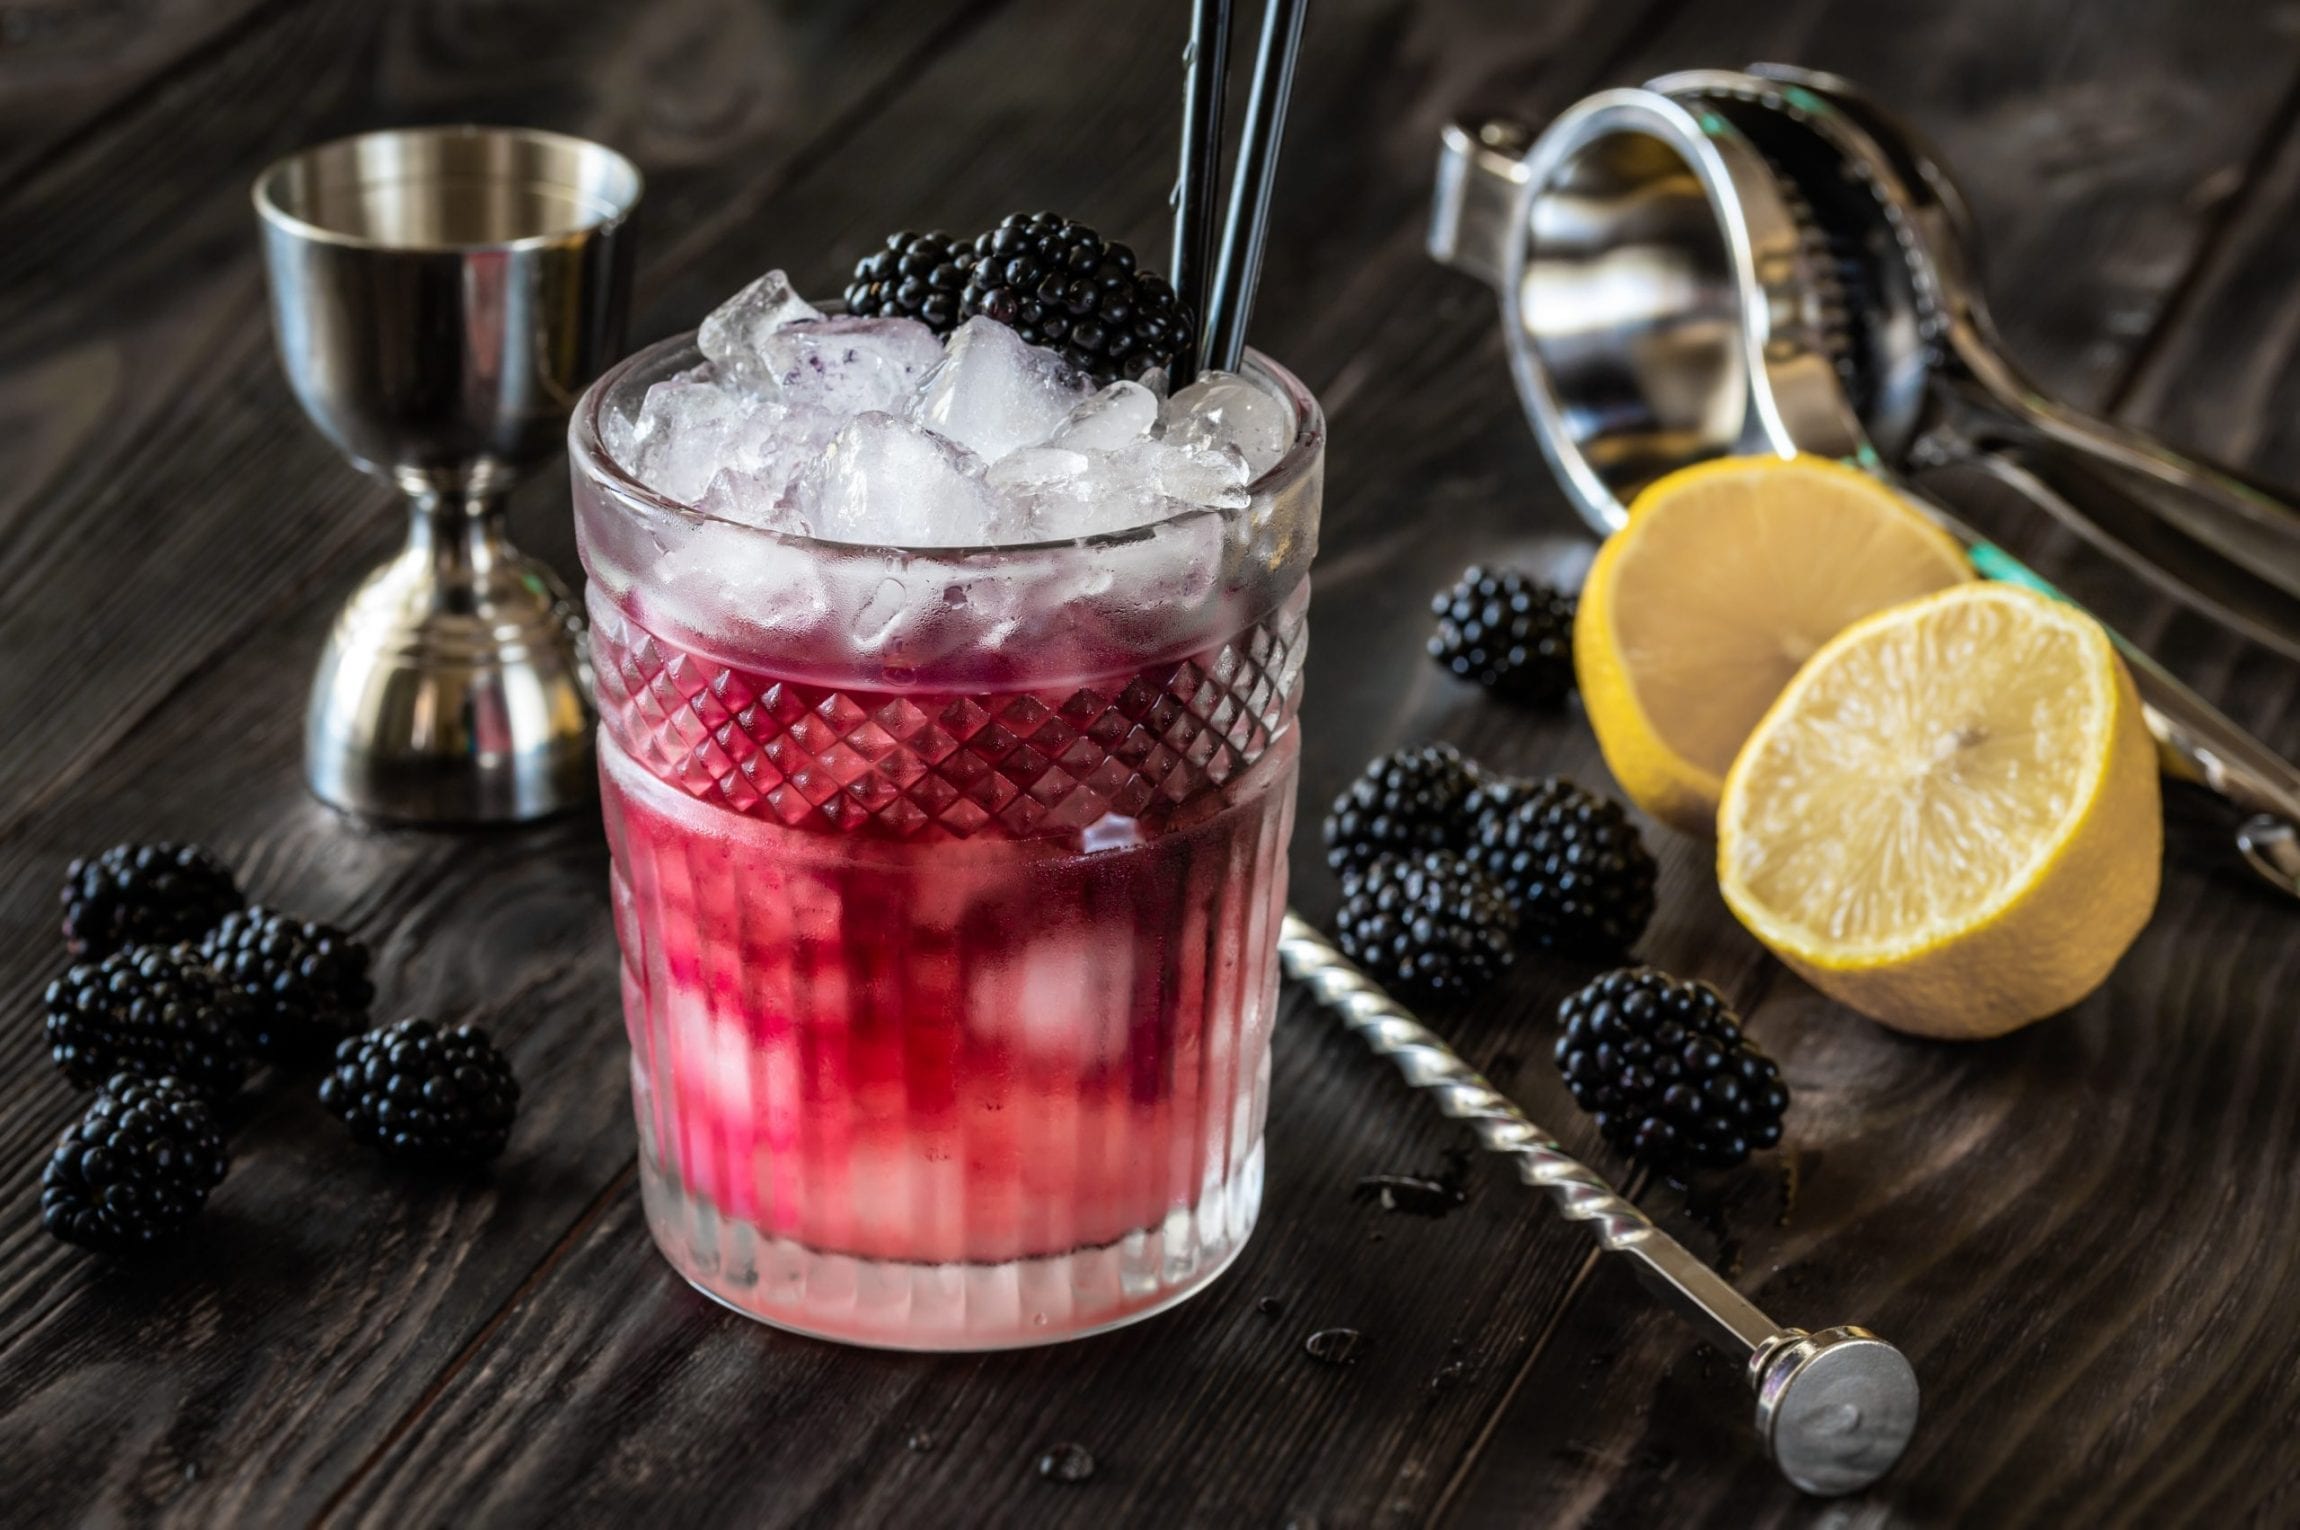 Glass of Bramble cocktail made of gin, lemon juice, sugar sypup and creme de mure